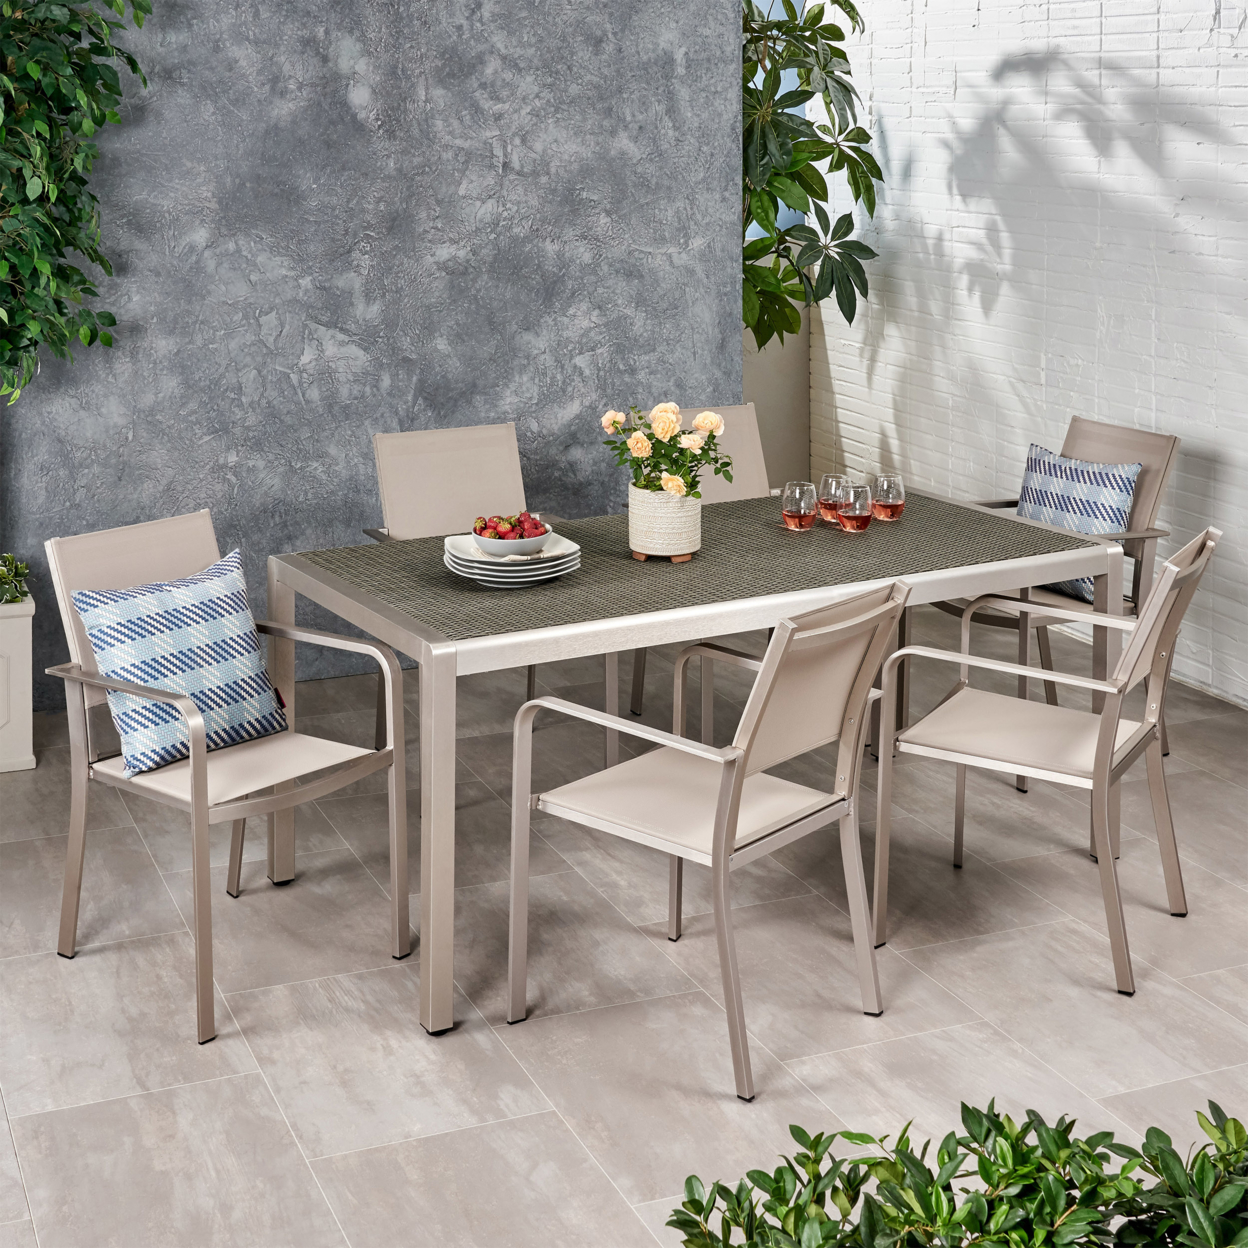 Fairy Outdoor Modern 6 Seater Aluminum Dining Set With Wicker Table Top - Aluminum + Faux Rattan + Outdoor Mesh